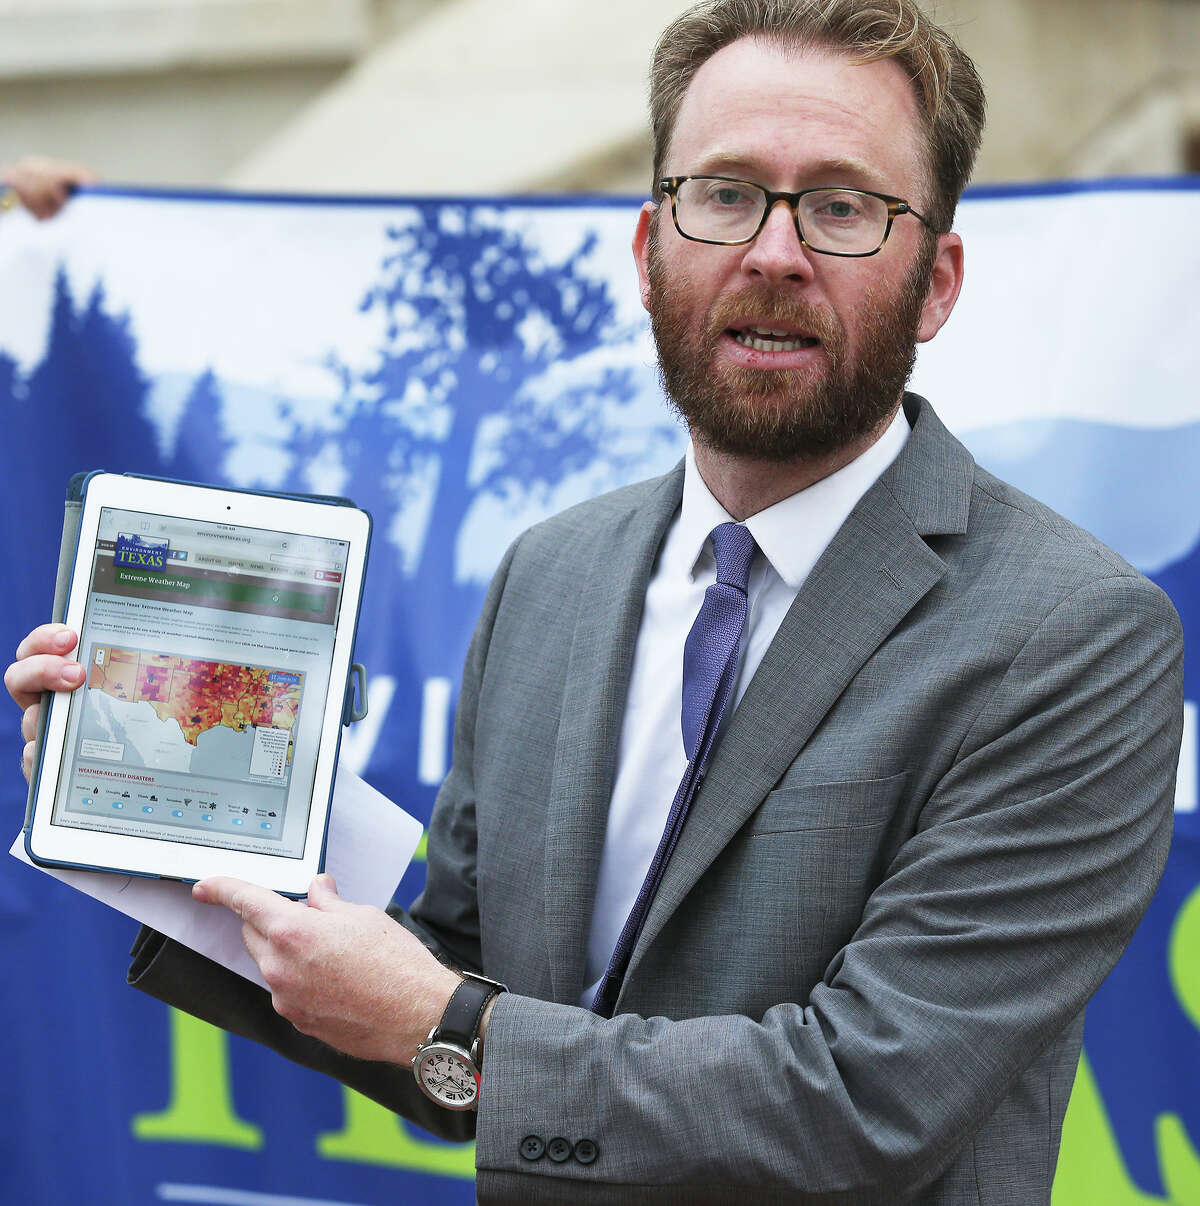 Luke Metzger , Director of Environment Texas shows the online map as his group and Moms Clean Air Force gather outside city hall to give their views on extreme weather and to unveil an interactive weather map on March 9, 2016.